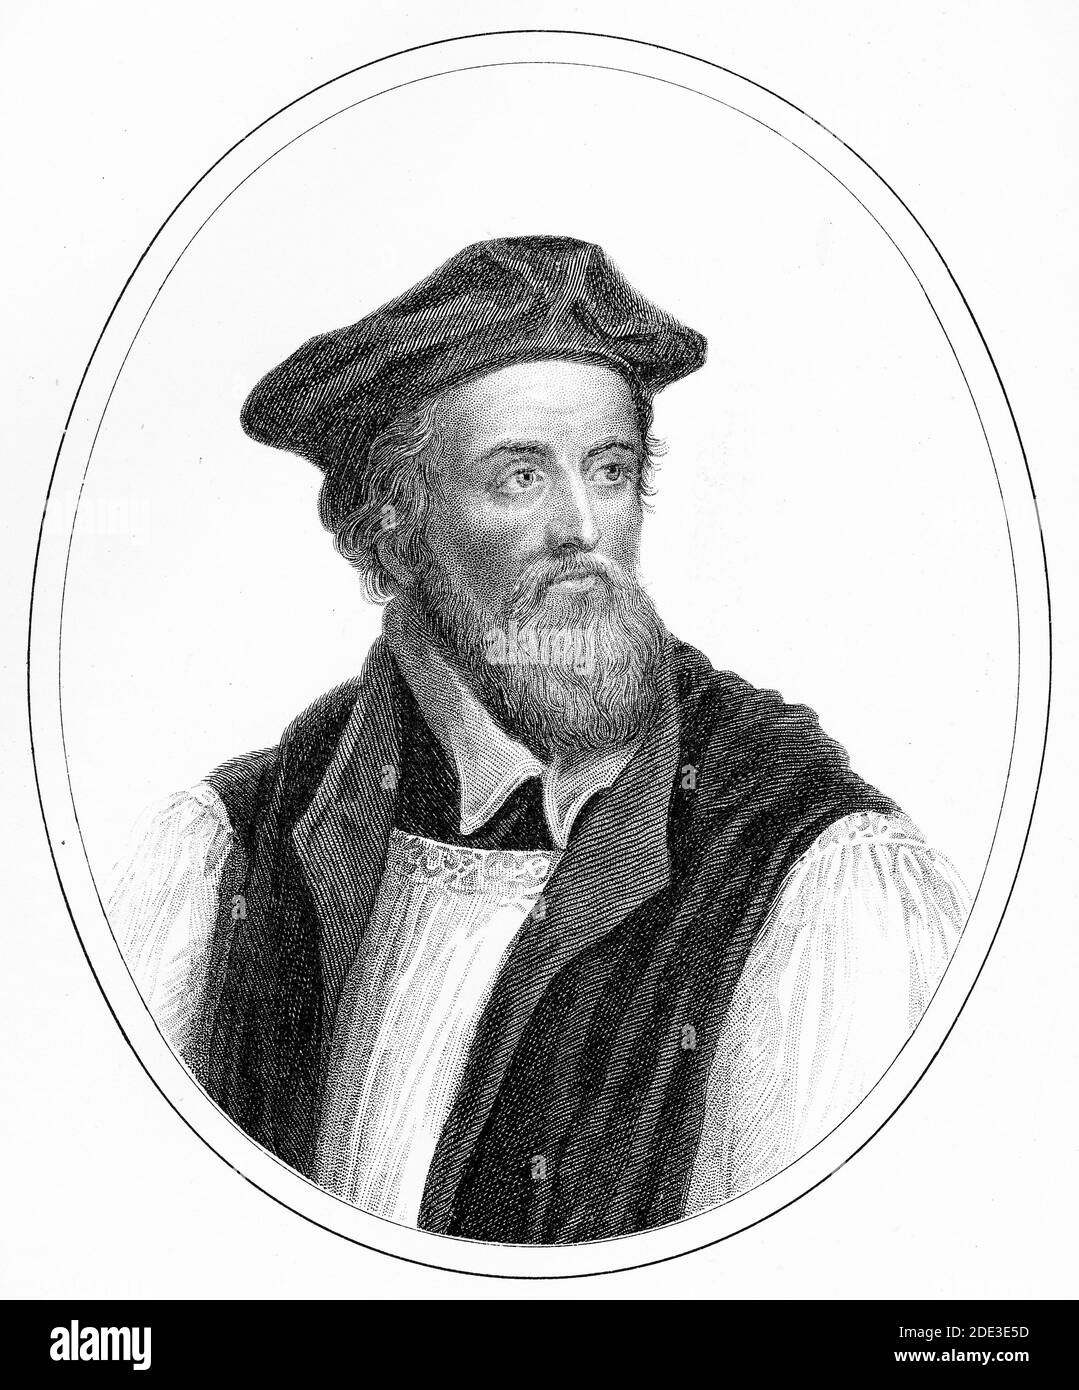 Engraving of Nicholas Ridley (c. 1500 – 16 October 1555), Bishop of London and martyr. Ridley was burned at the stake as one of the Oxford Martyrs during the Marian Persecutions for his teachings and his support of Lady Jane Grey.  Illustration from 'The history of Protestantism' by James Aitken Wylie (1808-1890), pub. 1878 Stock Photo